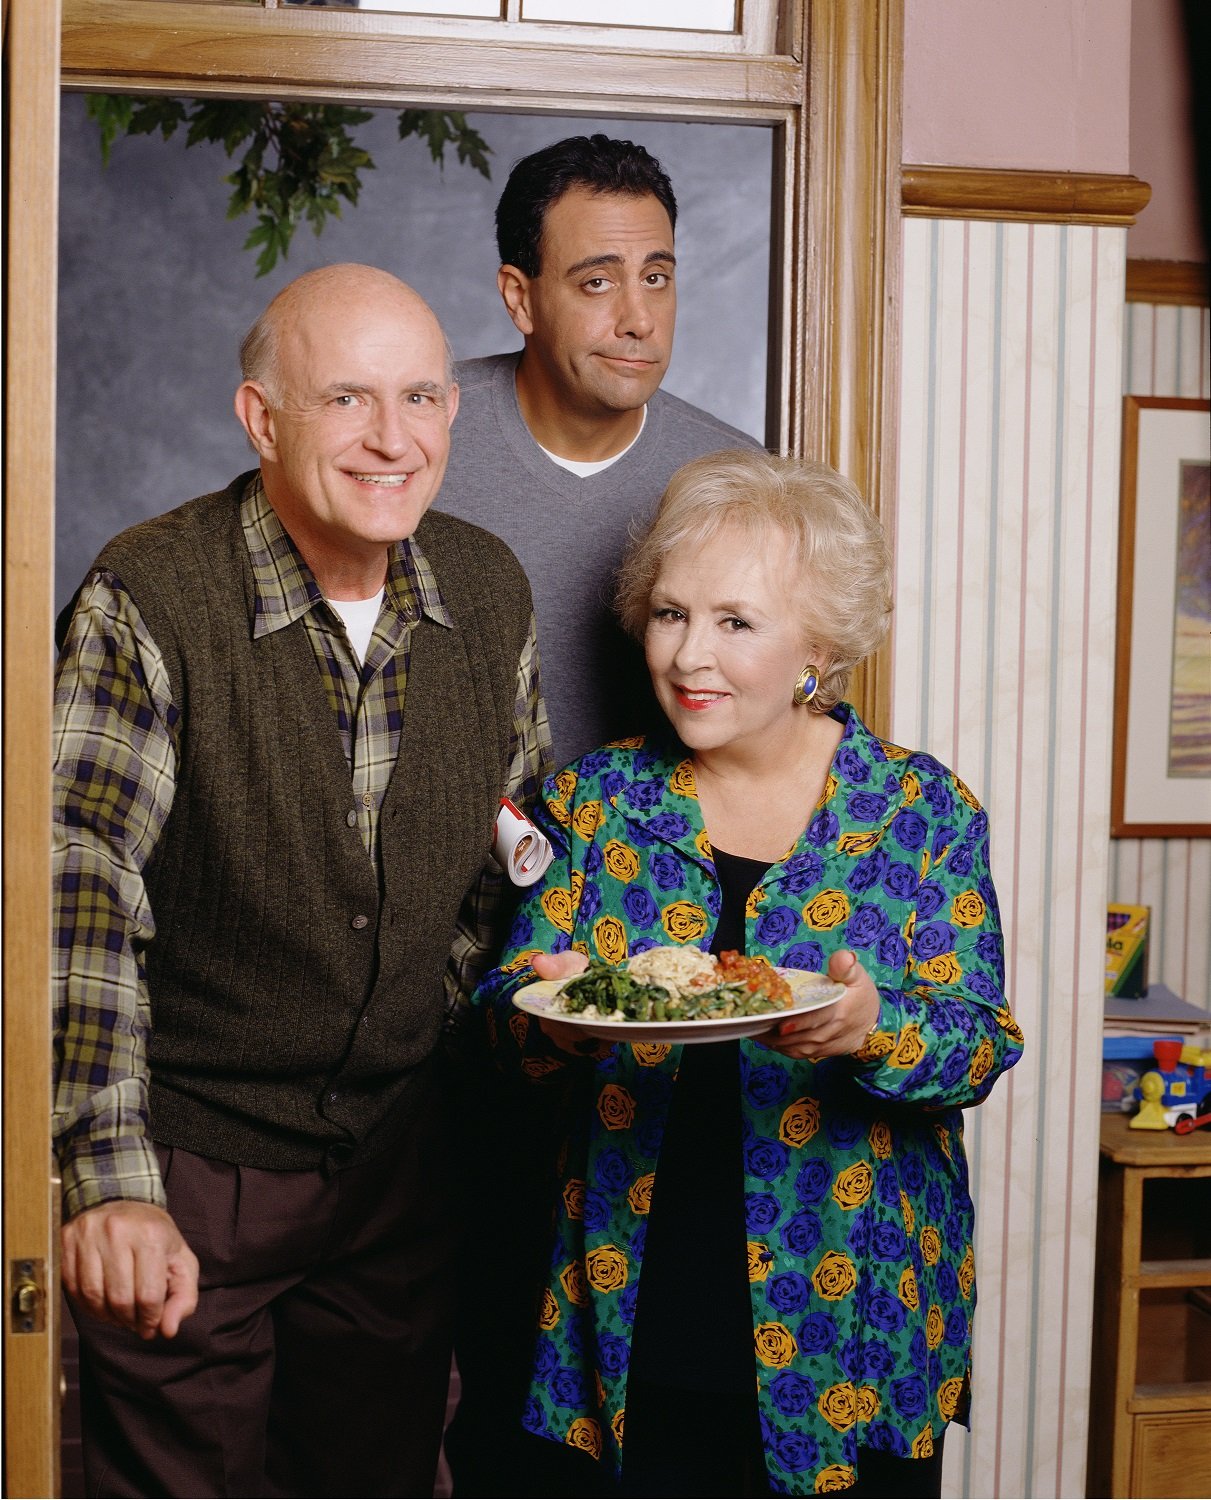 Frank, Robert and Marie Barone in 'Everybody Loves Raymond'